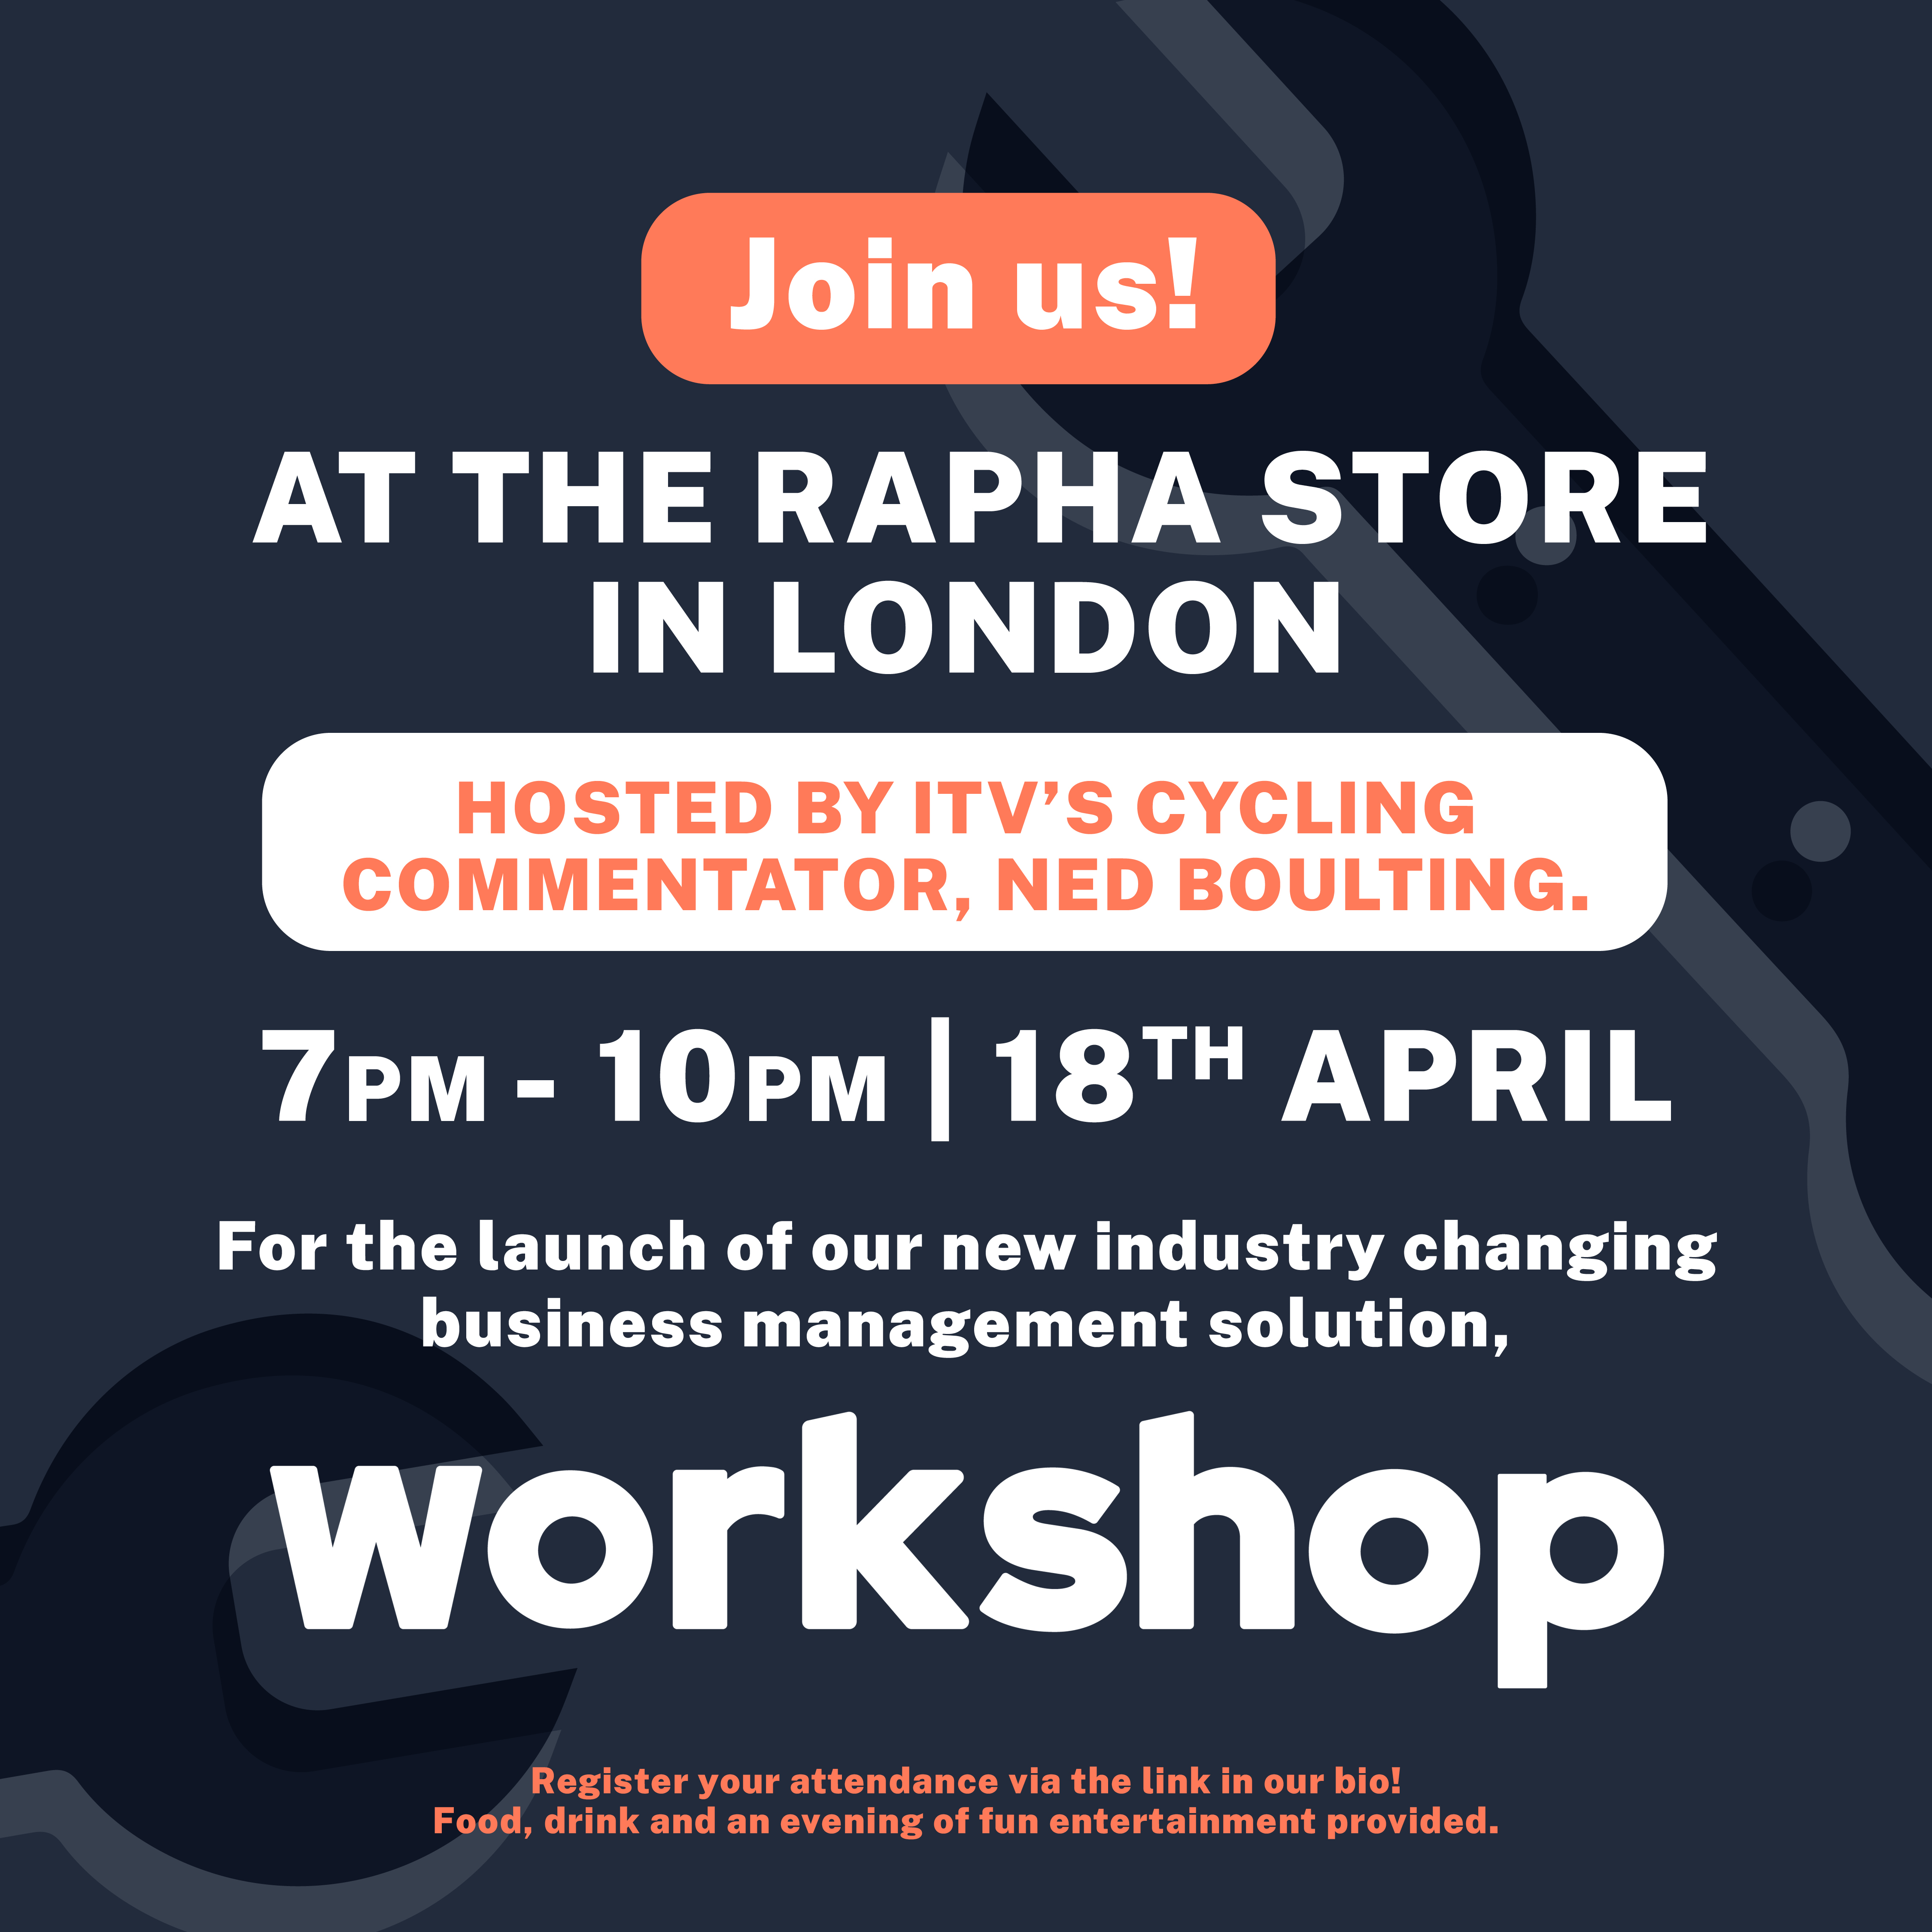 Join us for the launch event of our new business management solution, Workshop!